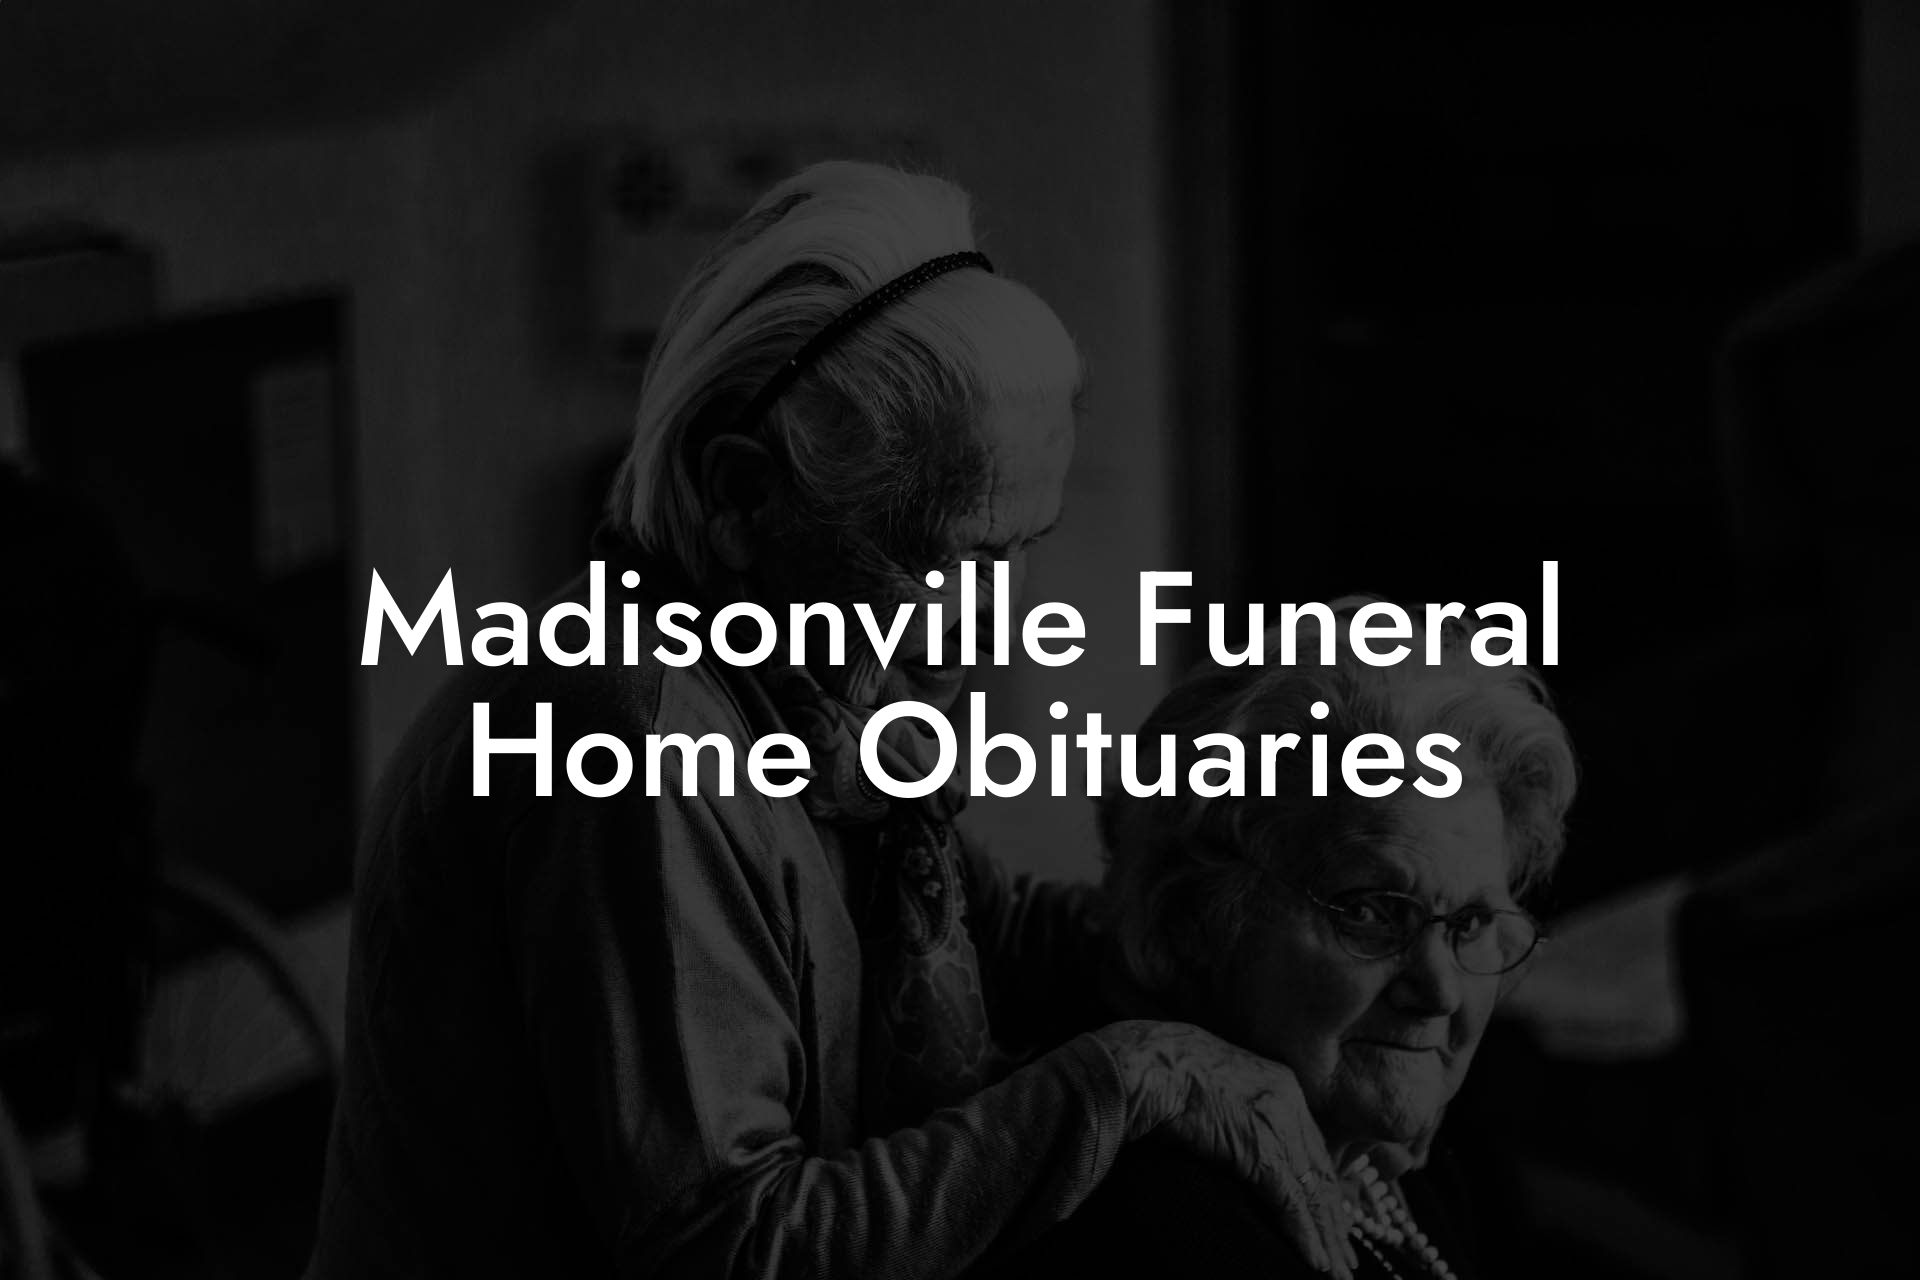 Madisonville Funeral Home Obituaries